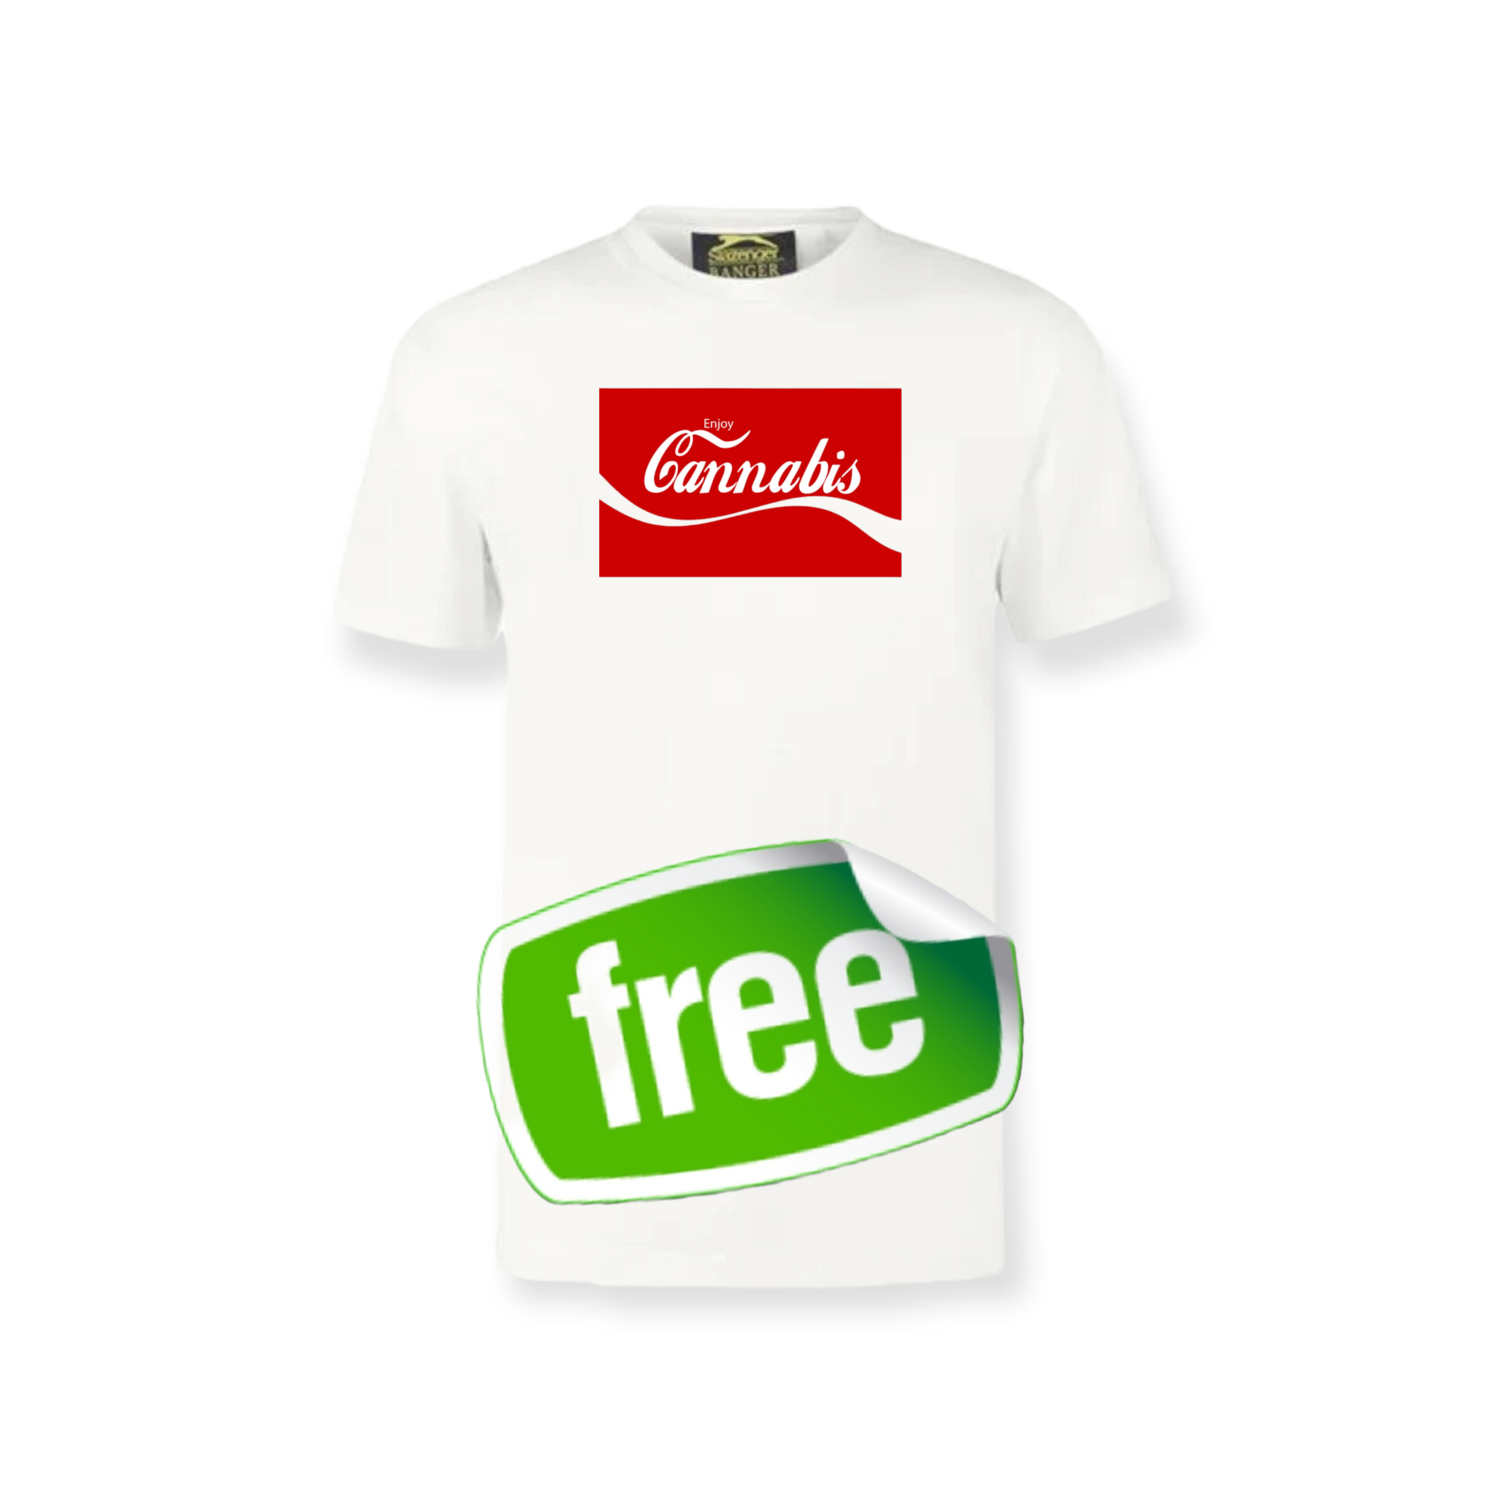 FREE tee  soda  EDITION  
Only small to xl is free anything bigger  is a lil extra